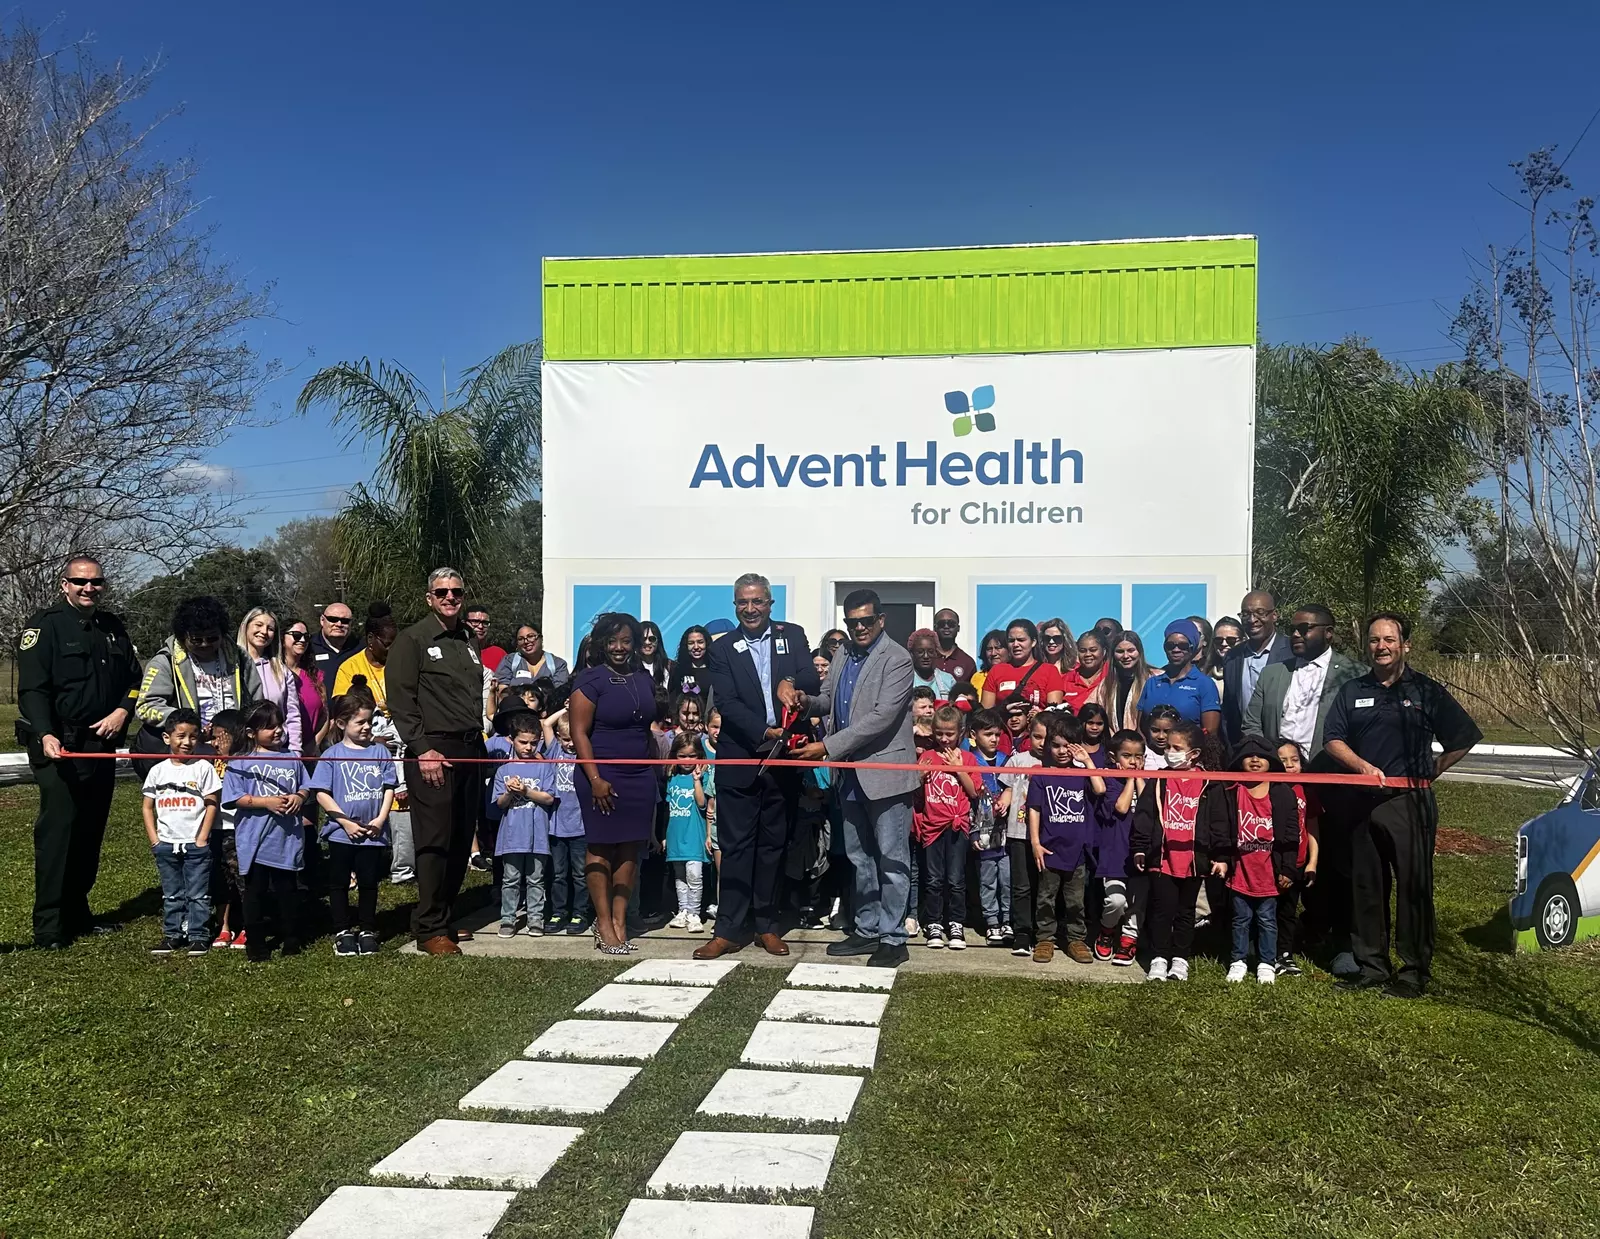 AdventHealth for Children and students from Arbor Ridge School cut the ribbon on a mini "hospital" in the Children's Safety Village.